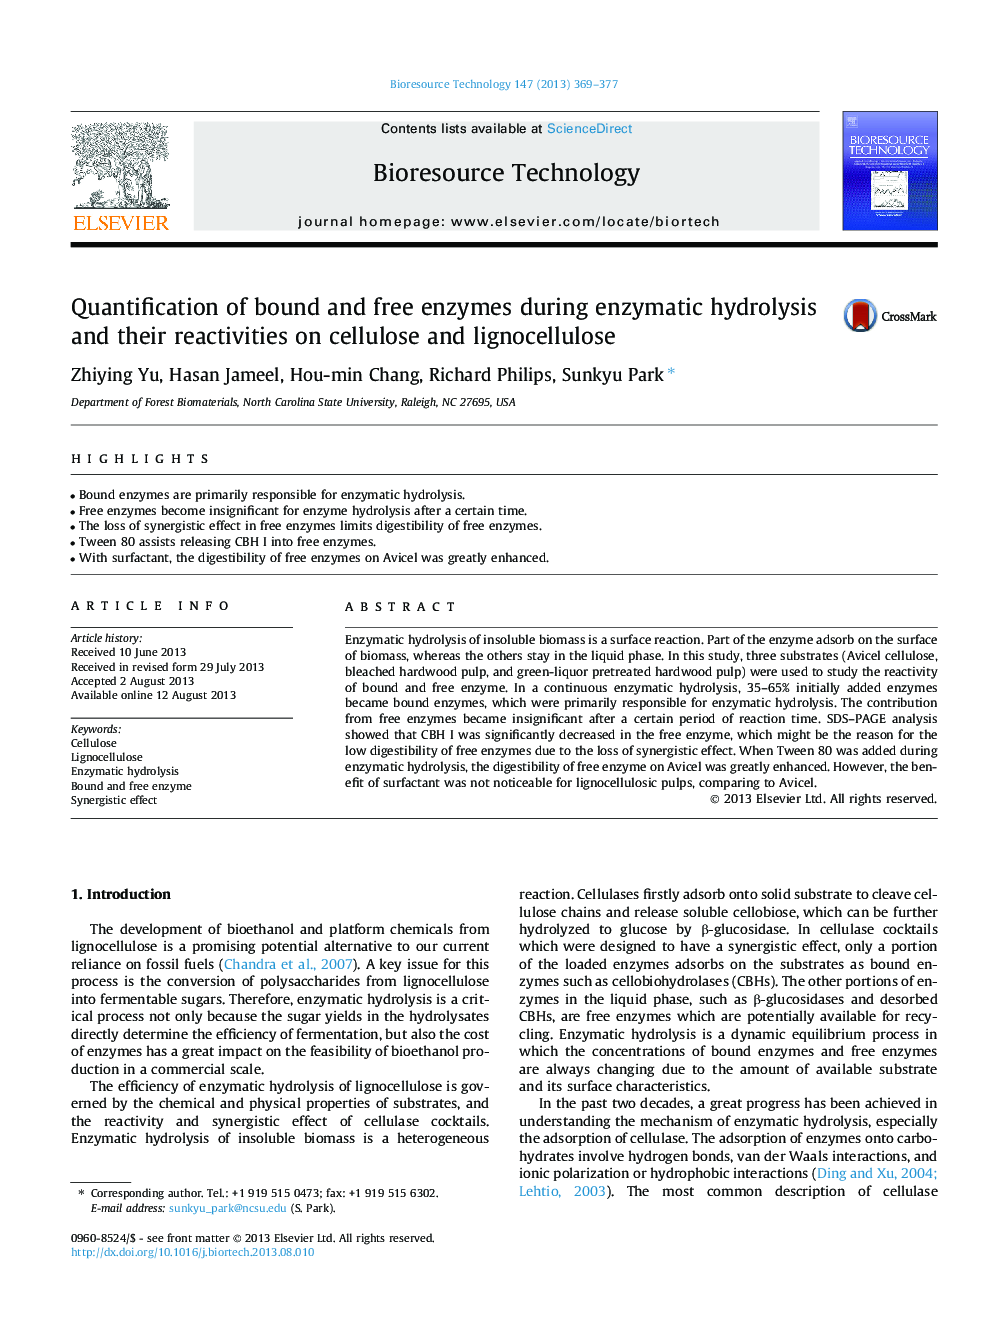 Quantification of bound and free enzymes during enzymatic hydrolysis and their reactivities on cellulose and lignocellulose